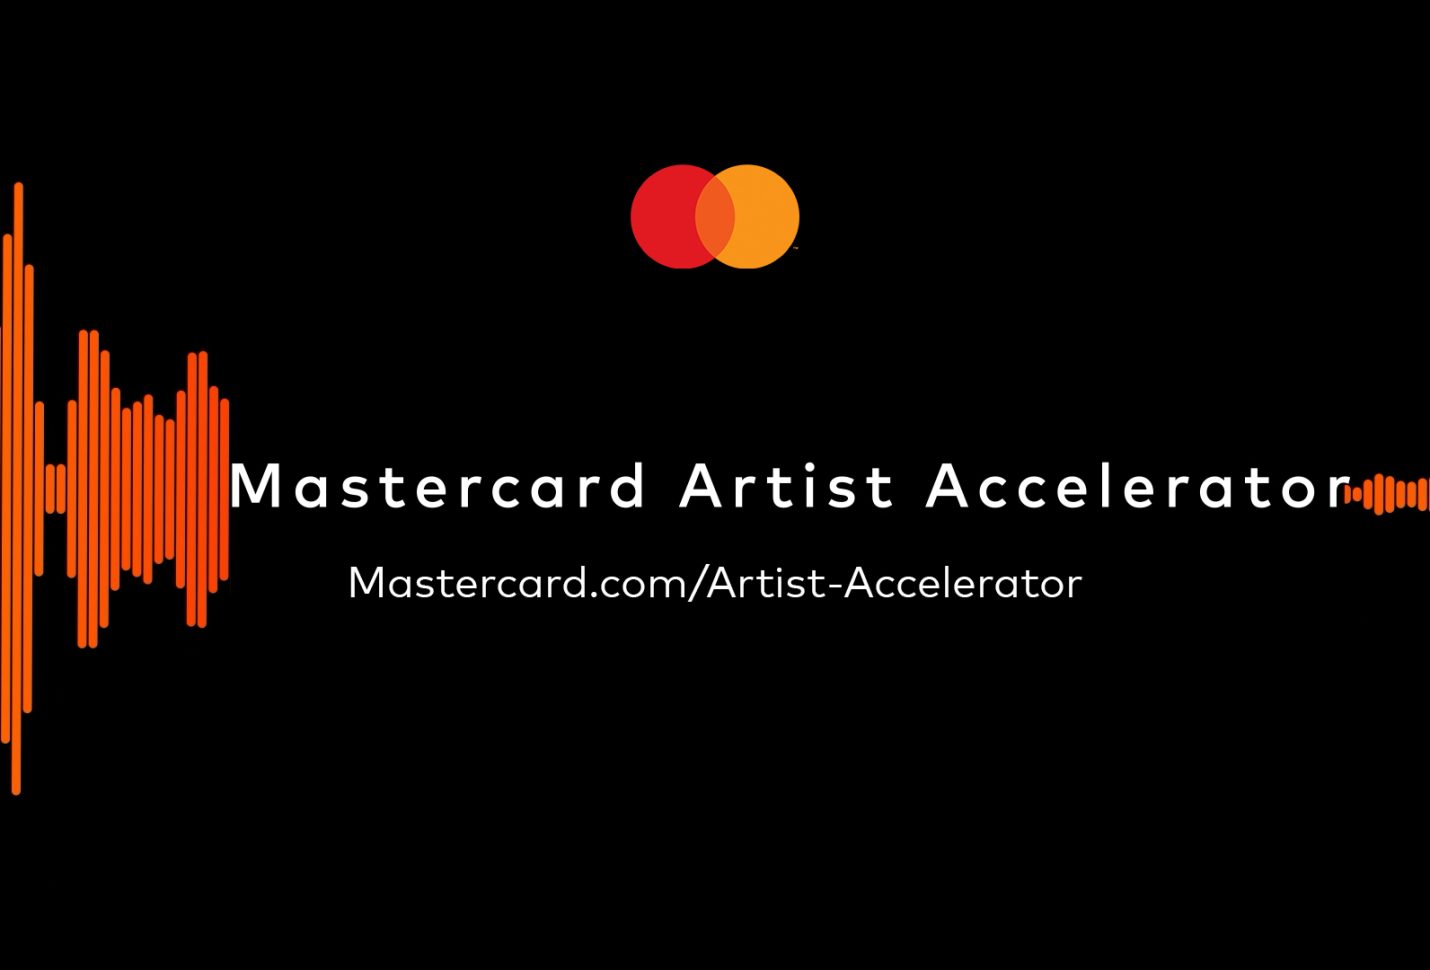 Mastercard Artist Accelerator to culminate in 2023 in livestreamed showcase